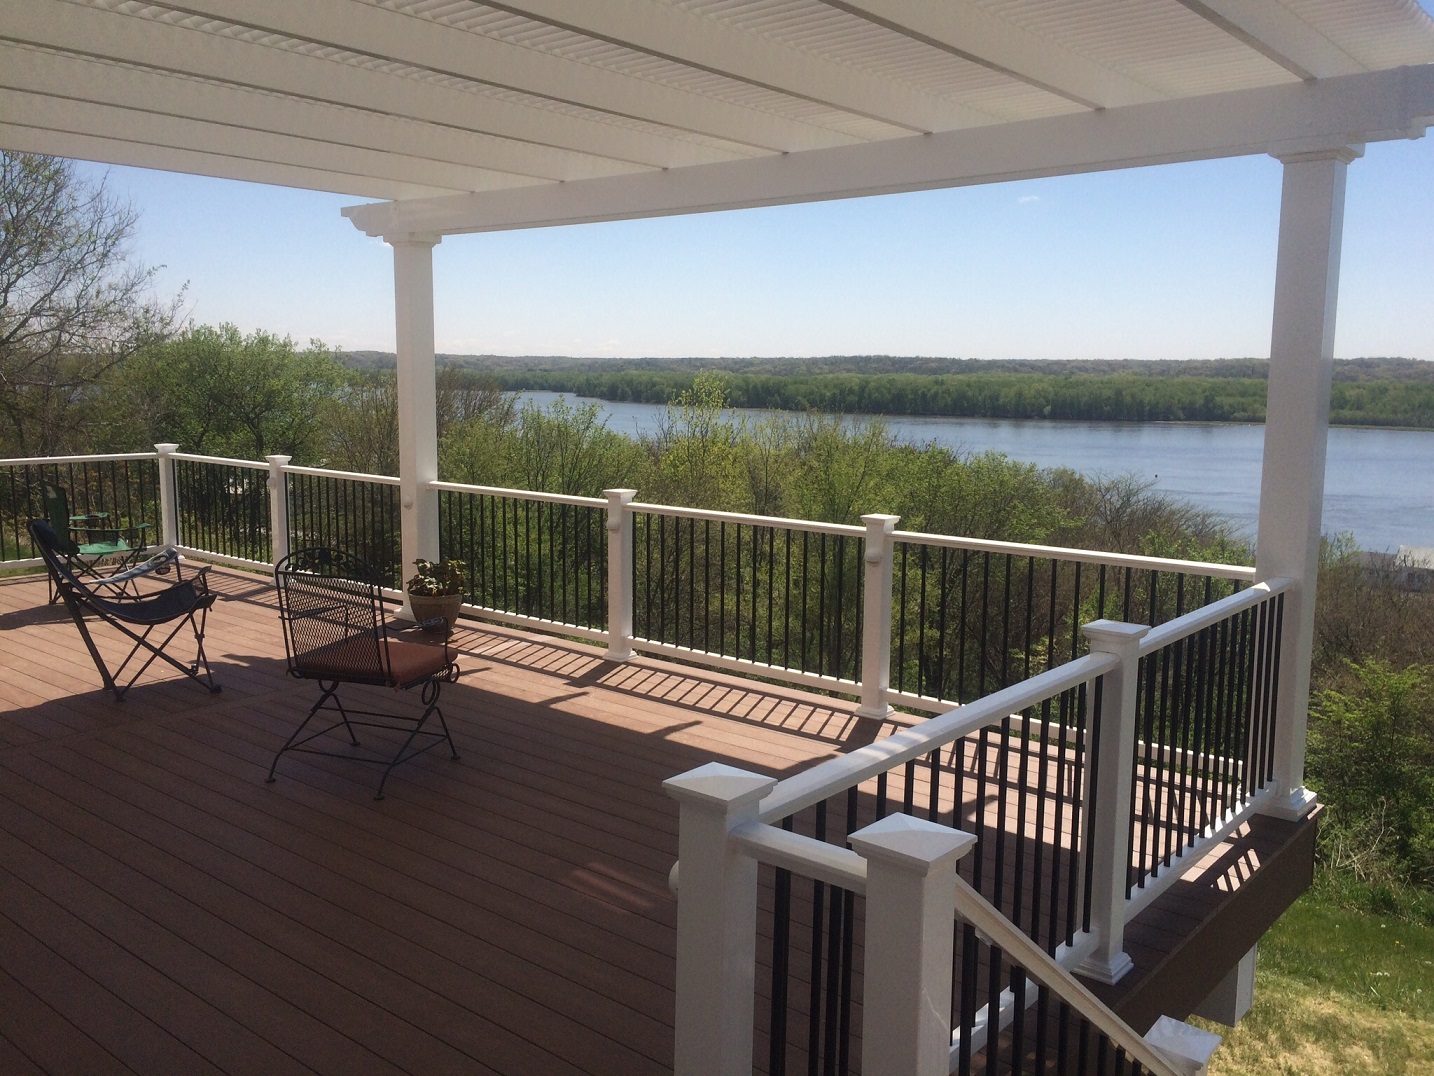 This large deck has a white pergola attached to provide shade. There are a couple chairs on the deck looking out to a body of water. There is a black and white railing across the deck’s perimeter.